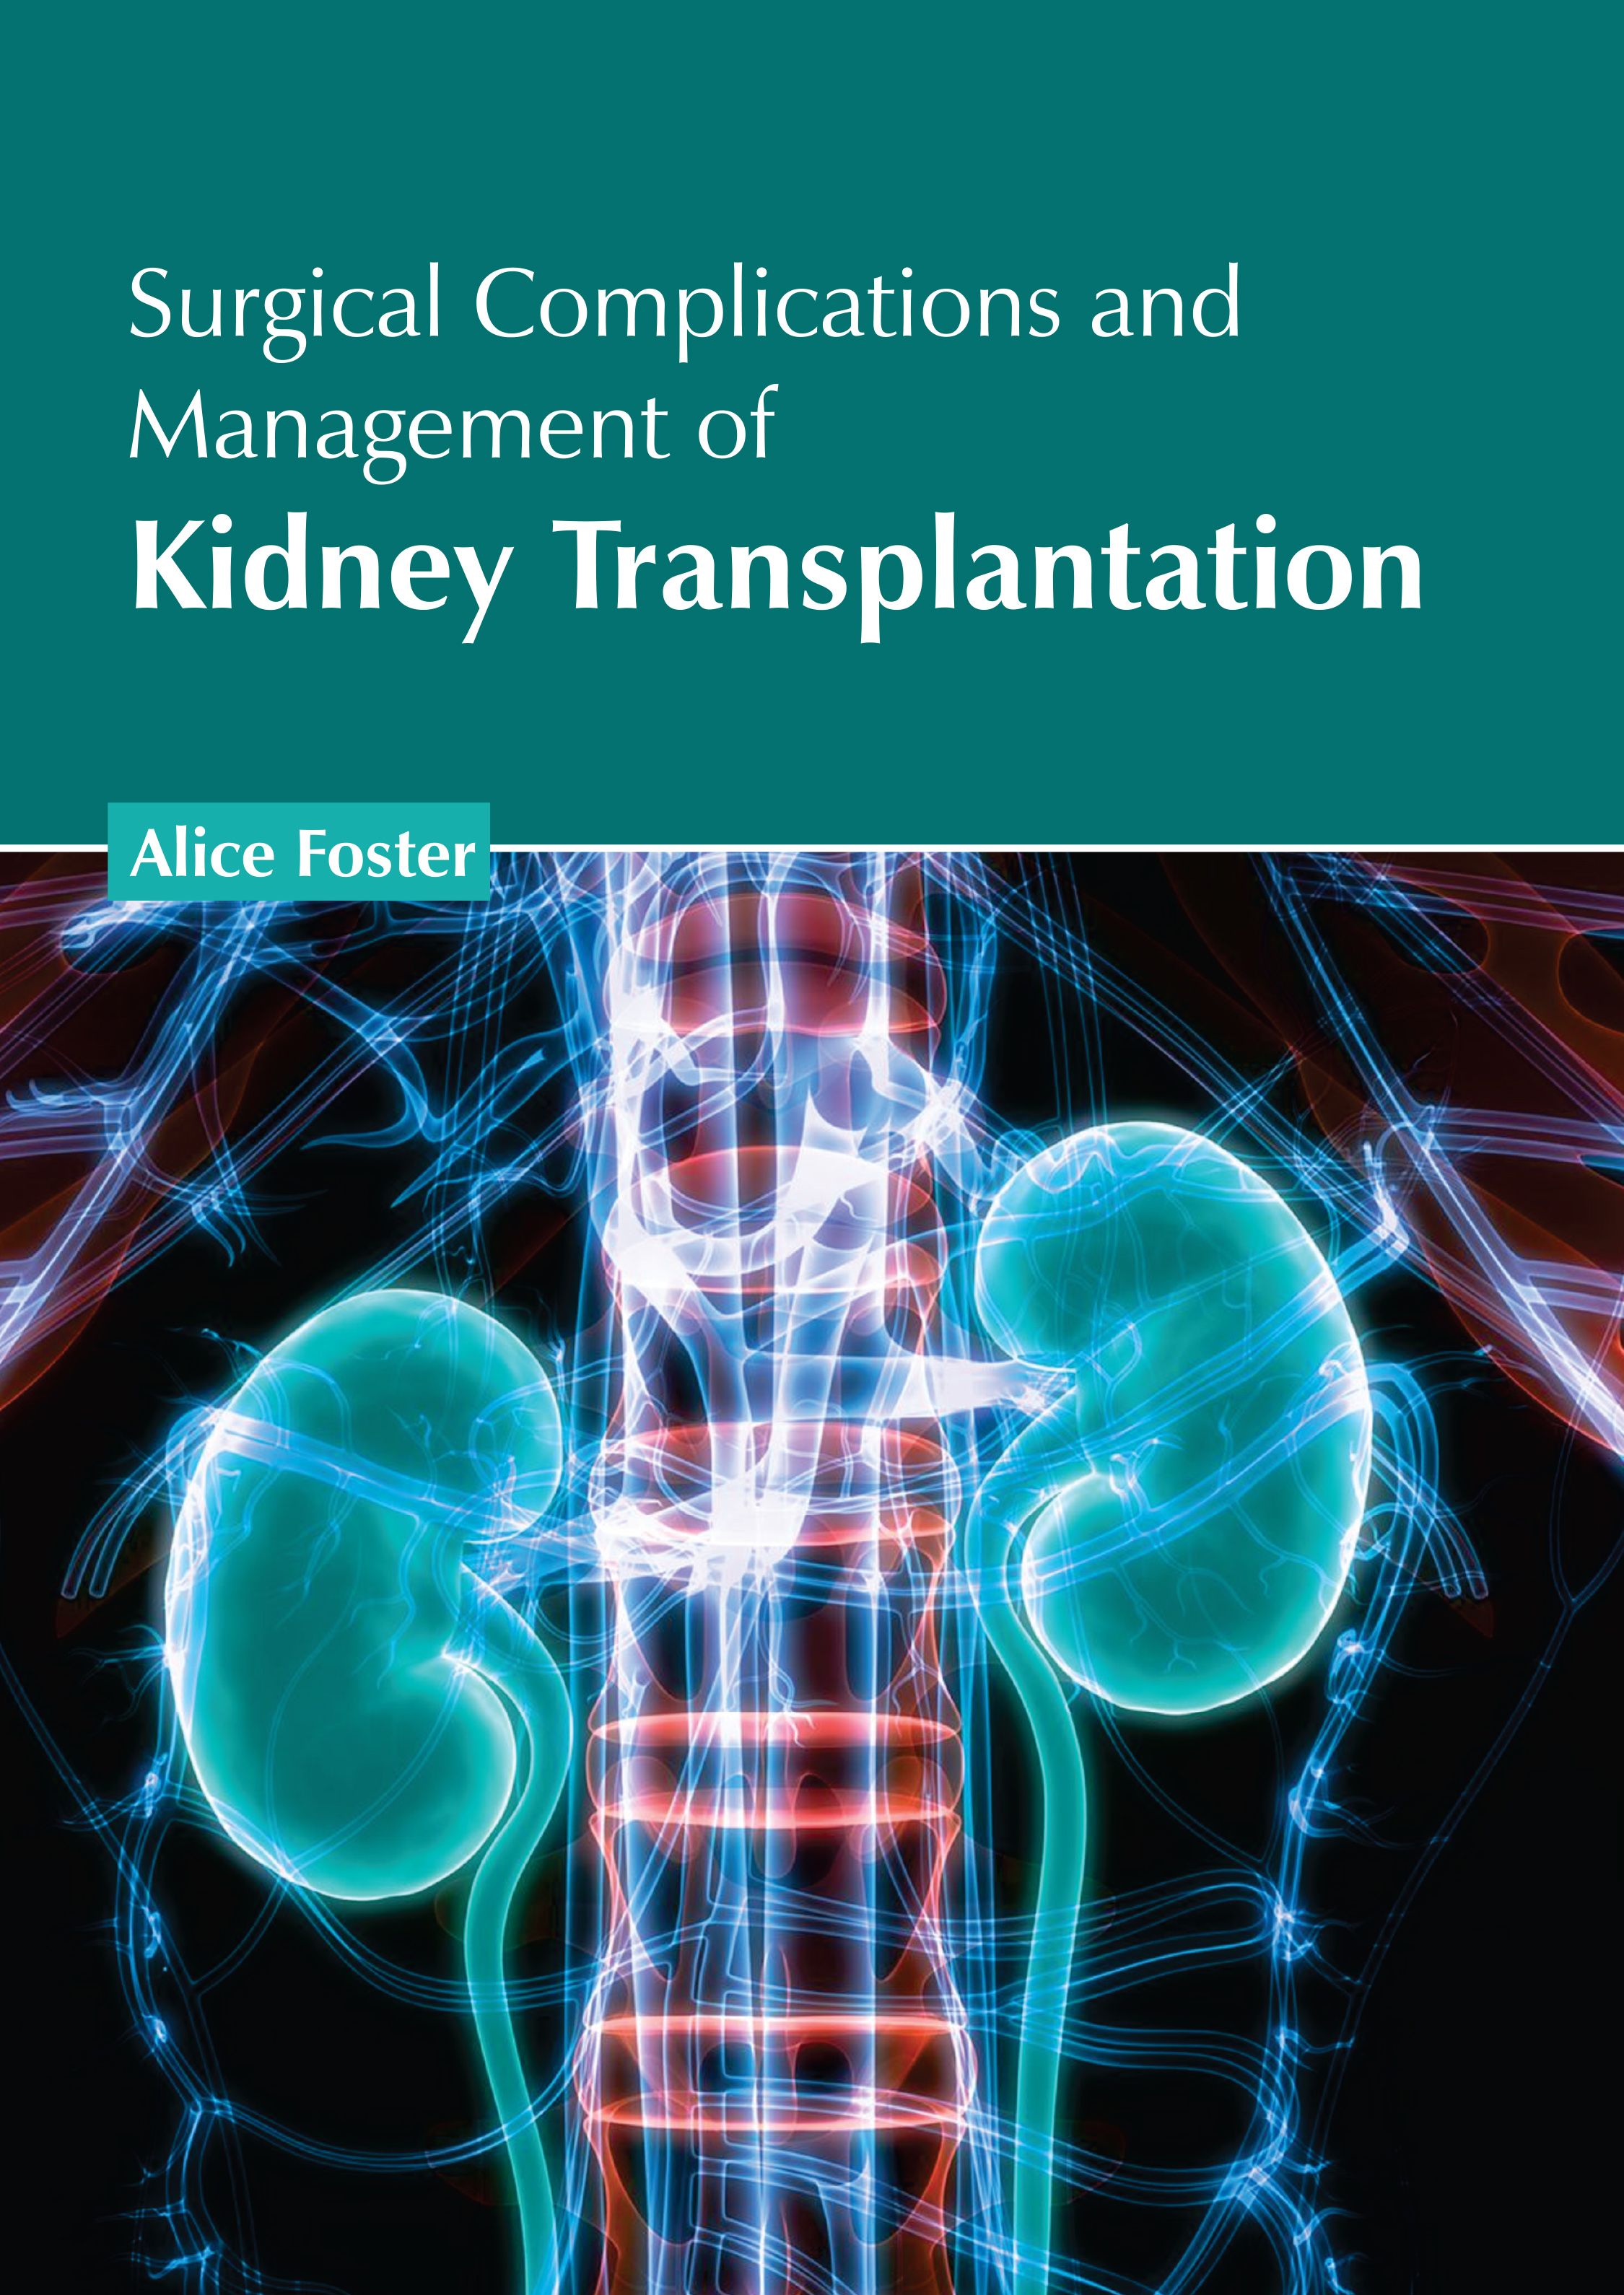 SURGICAL COMPLICATIONS AND MANAGEMENT OF KIDNEY TRANSPLANTATION